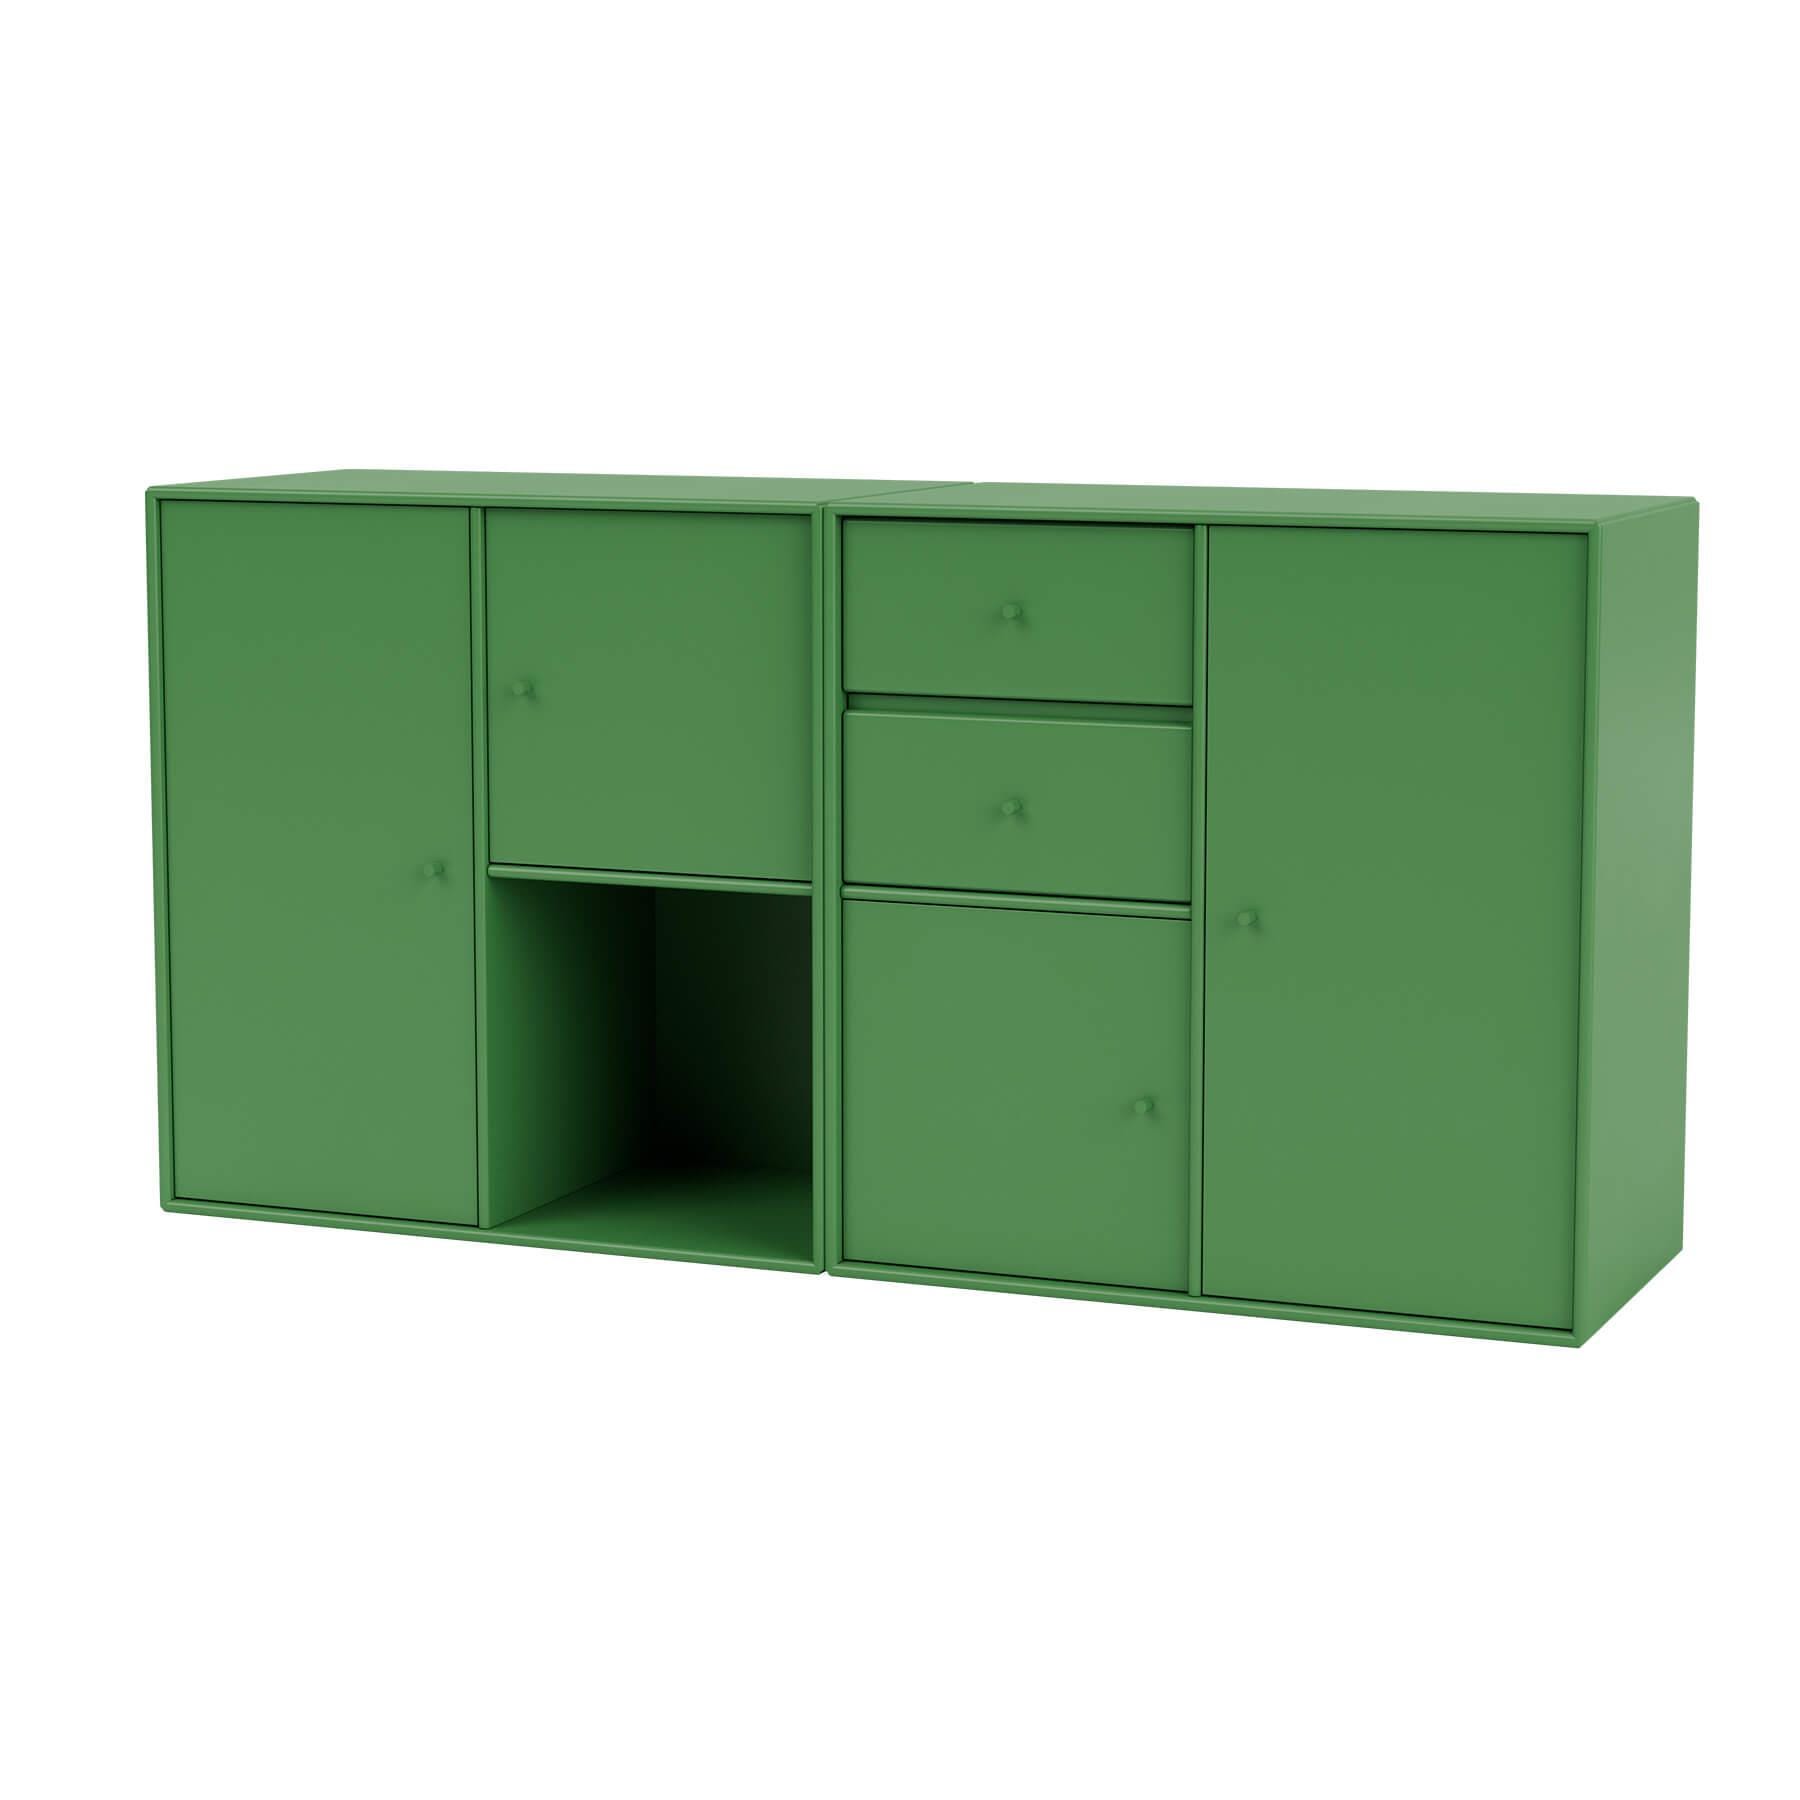 Montana Couple Sideboard Parsley Wall Mounted Green Designer Furniture From Holloways Of Ludlow